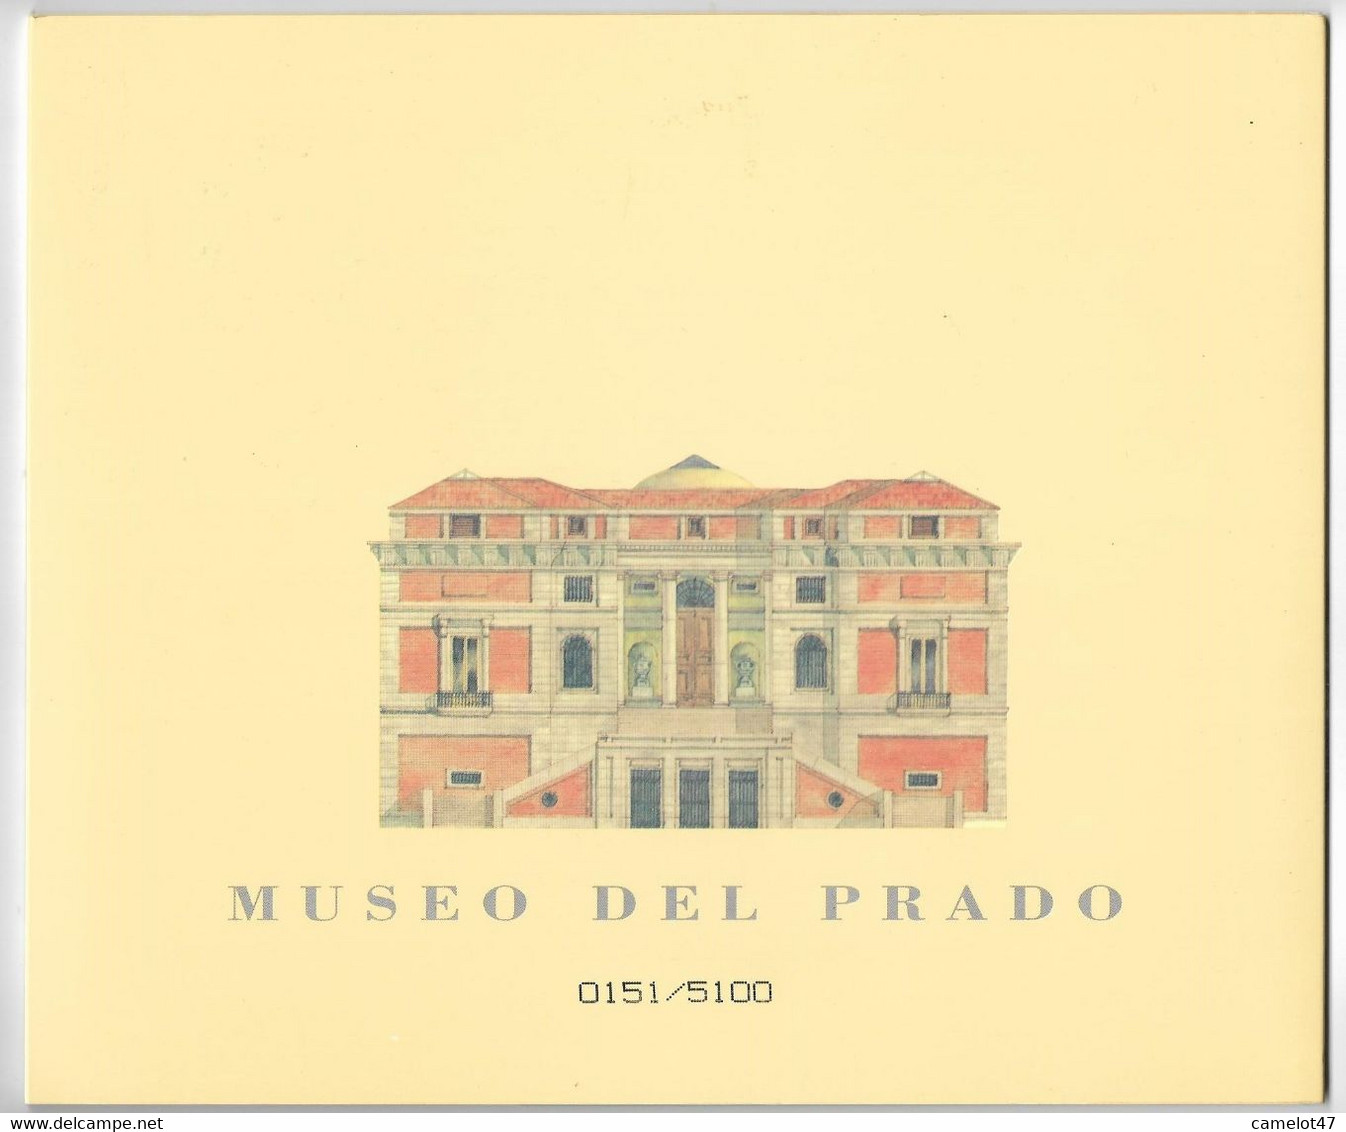 Spain Prado Museum, 4 Chip Phone Cards, Private, Limited Edtion In Folder # P-180-181-182-195 Folder - Painting